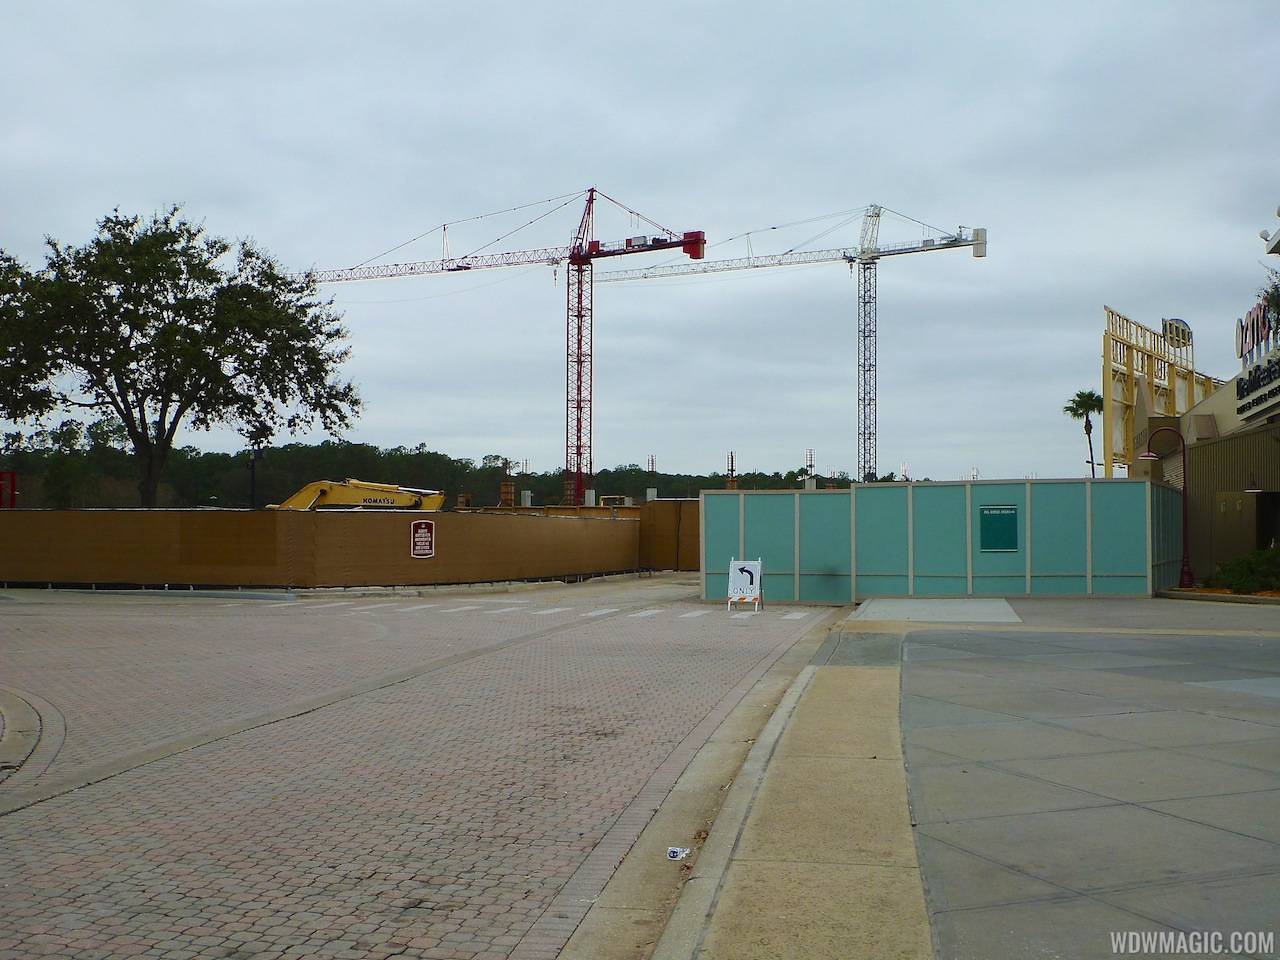 PHOTOS - Tower Cranes now working on the Disney Springs parking garage